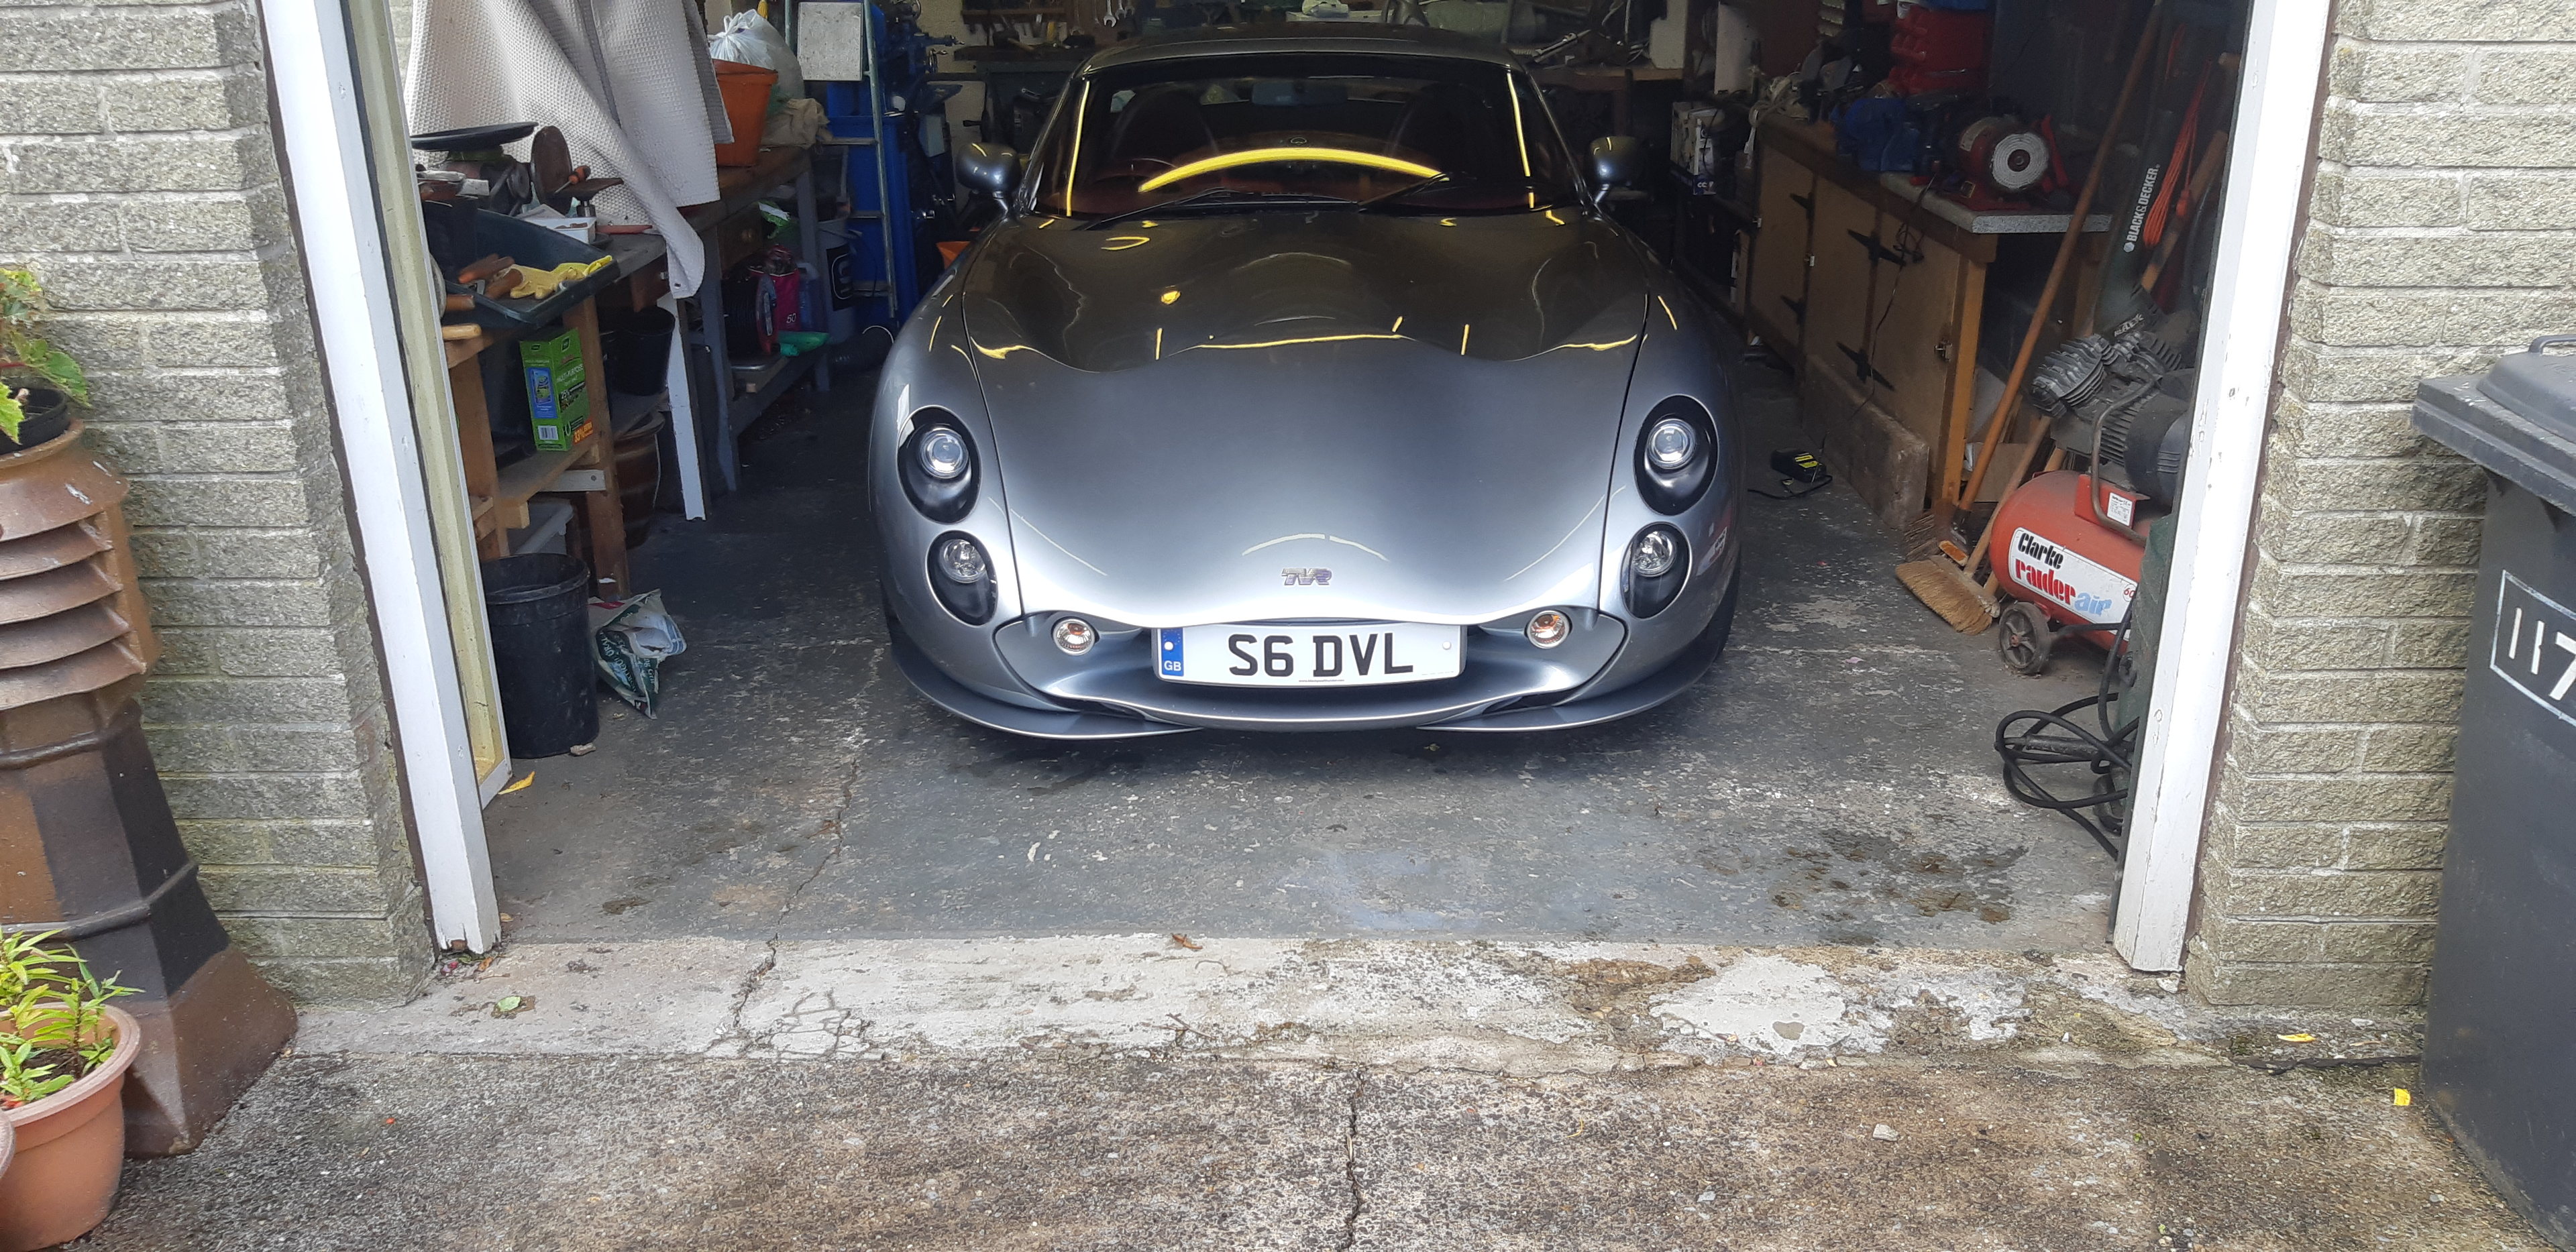 TVR Number Plates Love 'em or loath 'em there's plenty - Page 10 - General TVR Stuff & Gossip - PistonHeads